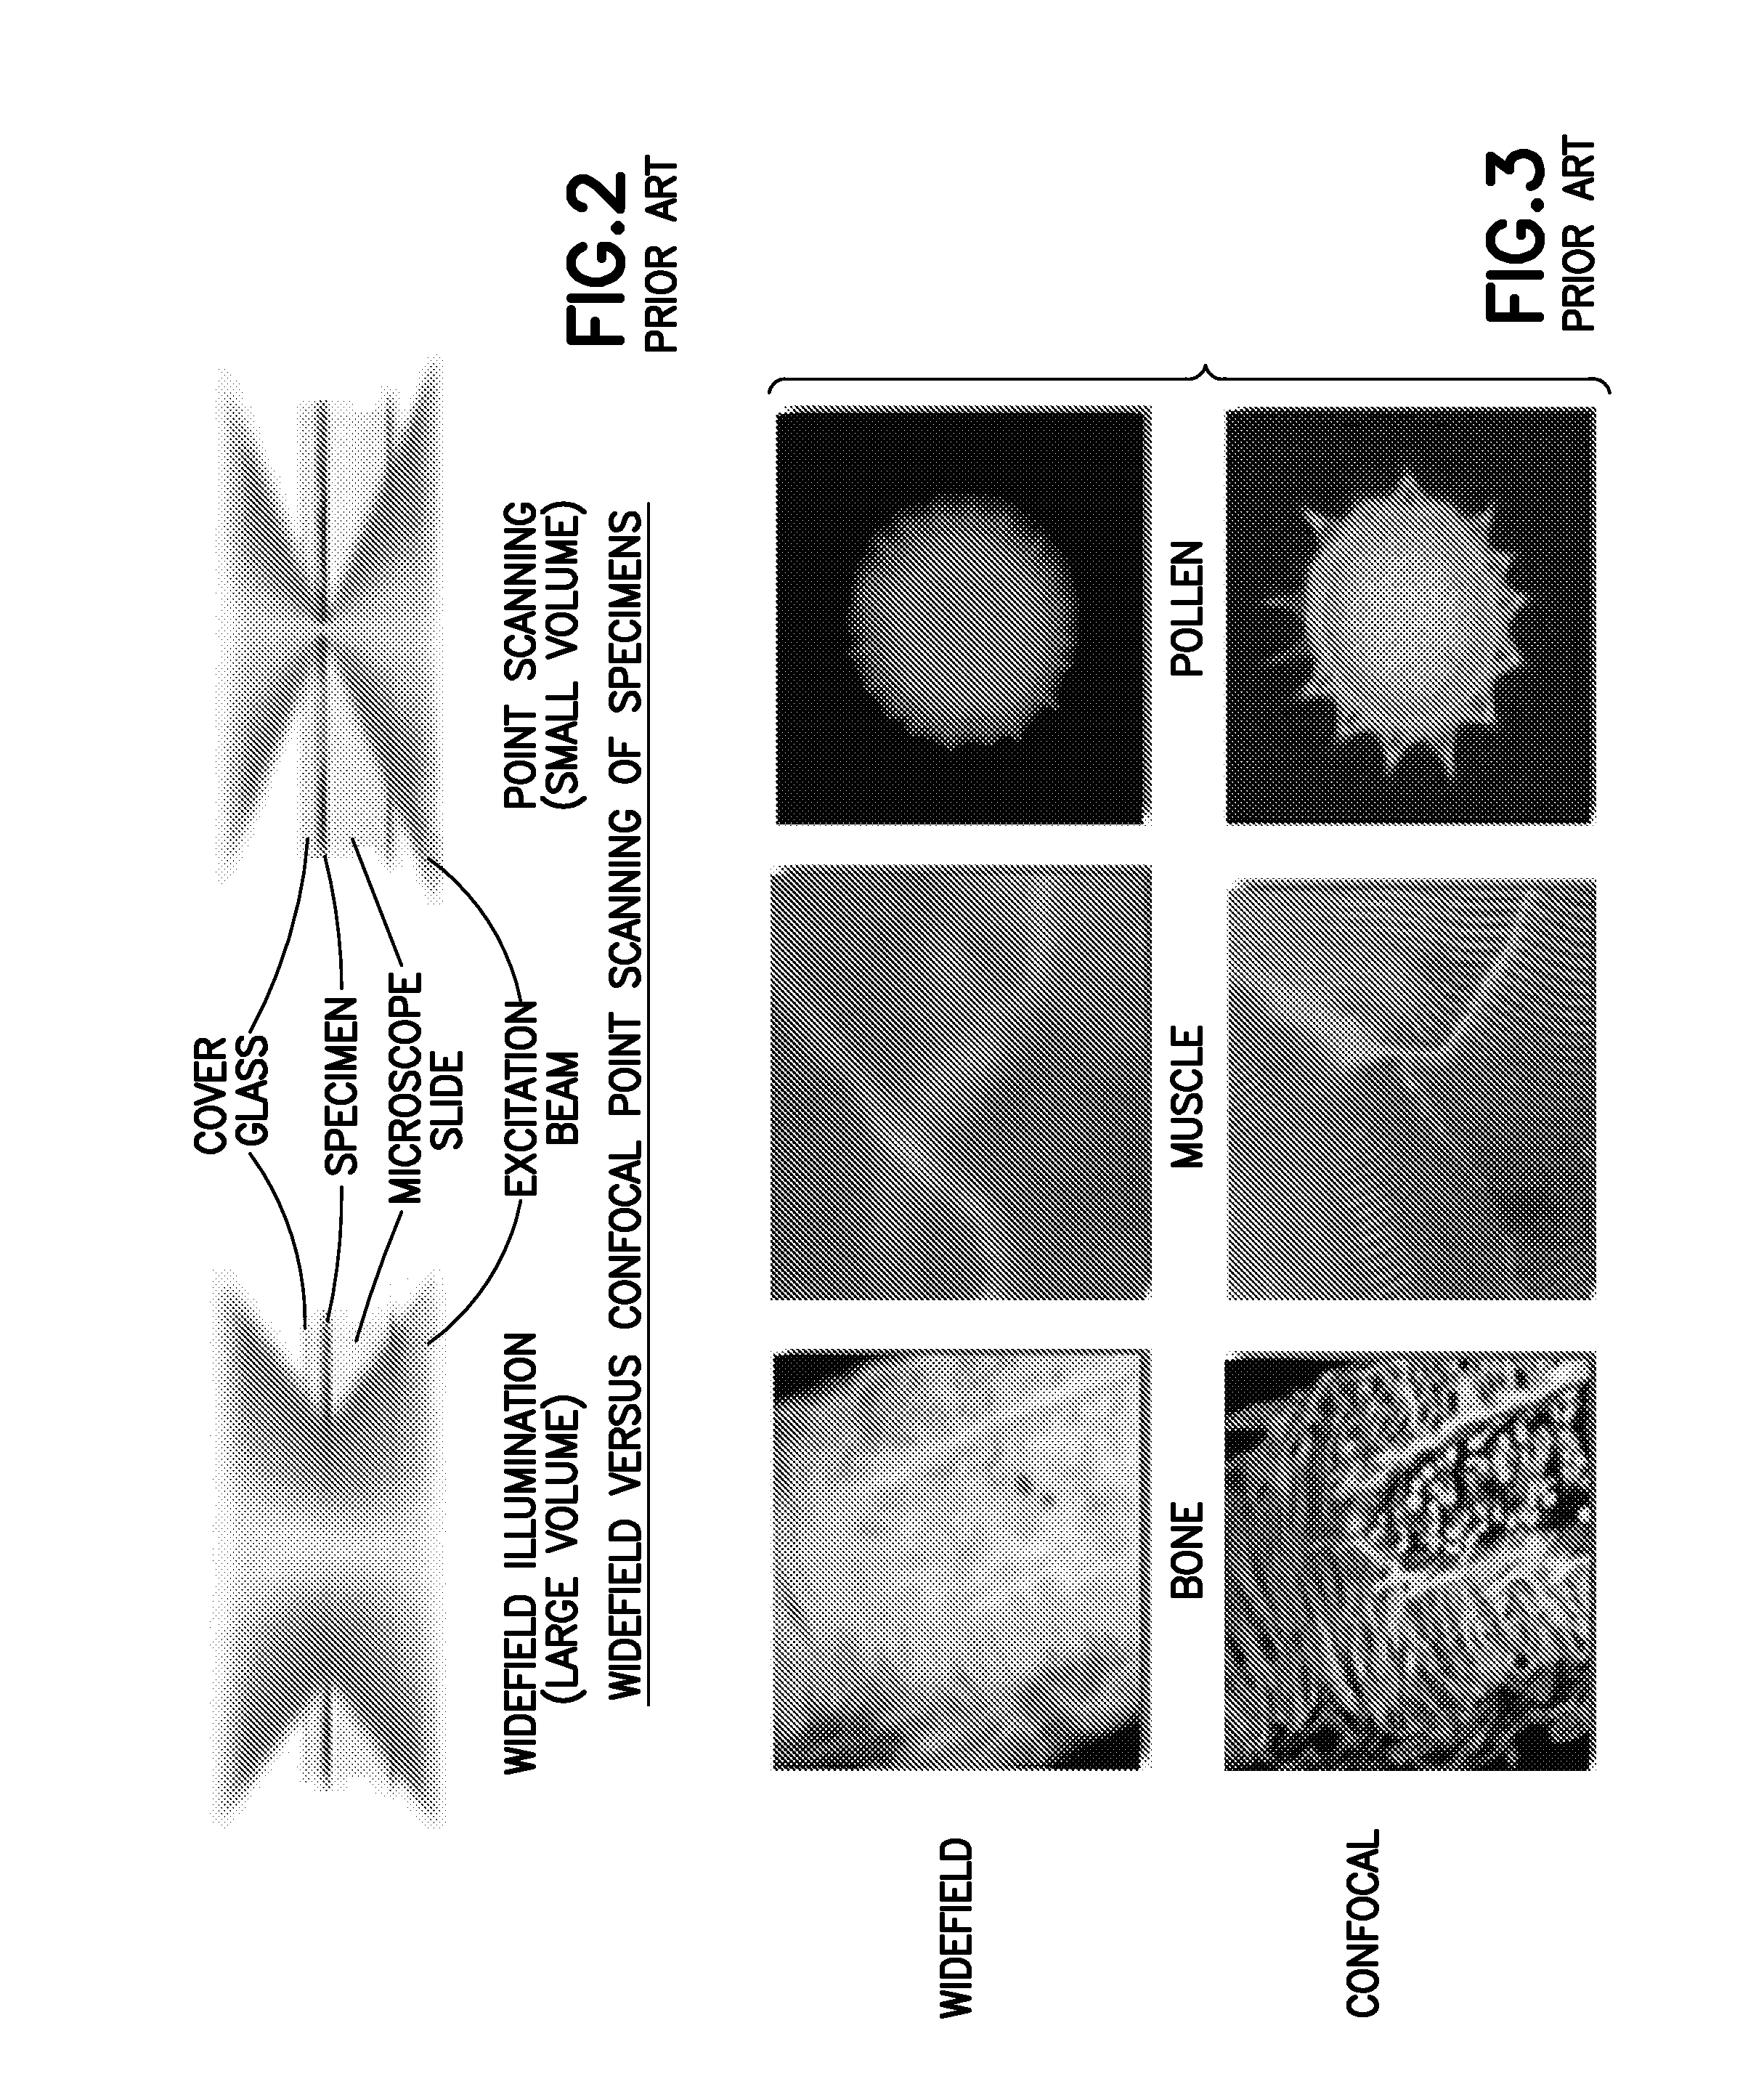 Method to quantify discrete pore shapes, volumes, and surface areas using confocal profilometry